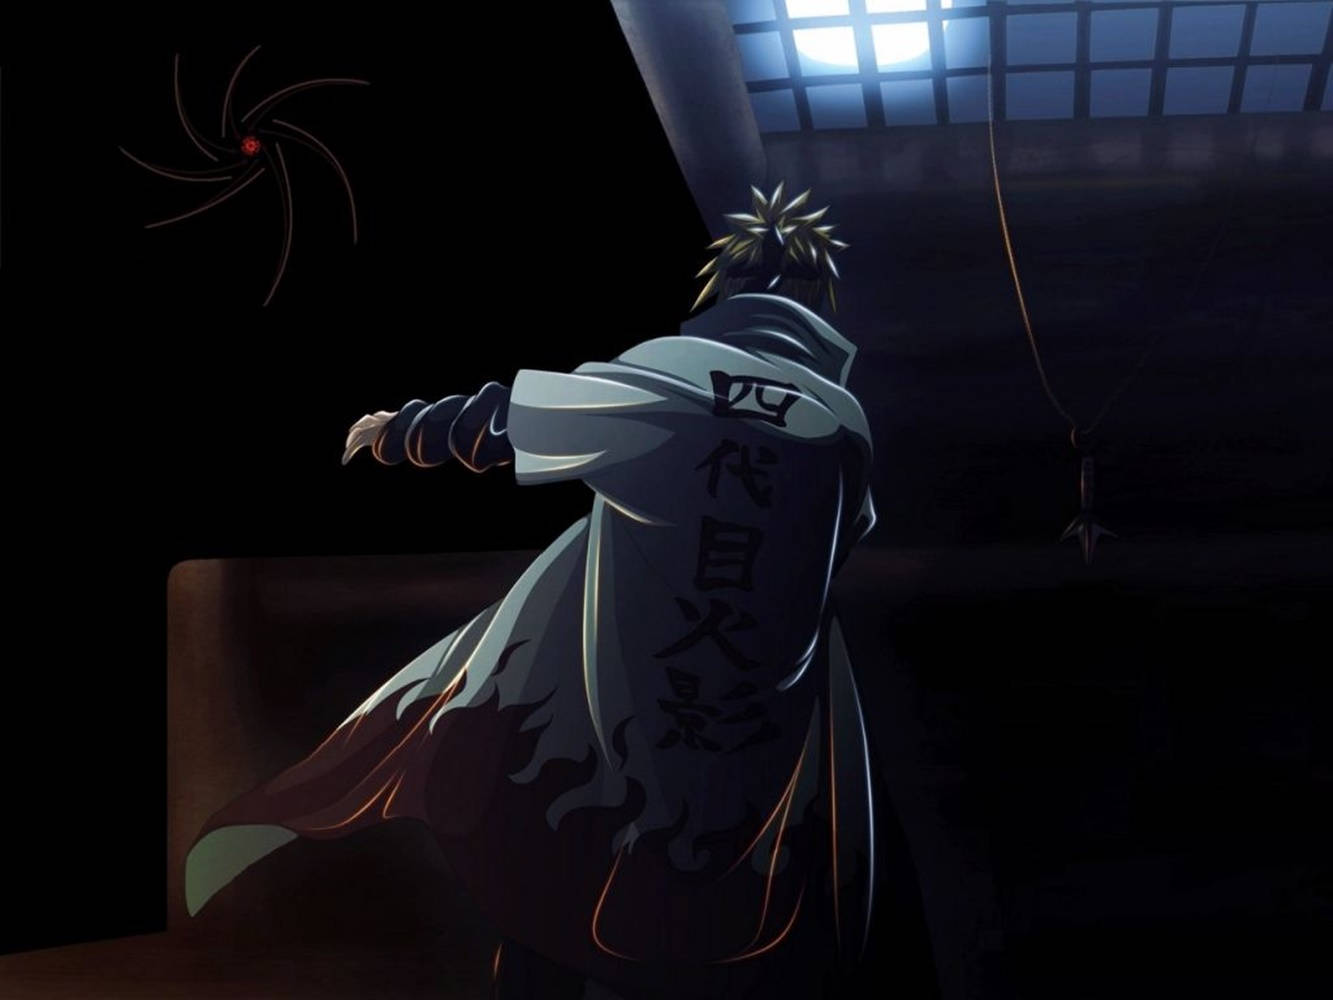 Epic Showdown Between The Fourth Hokage Minato Namikaze And Obito With His Mask; A Pivotal Point In Naruto Background